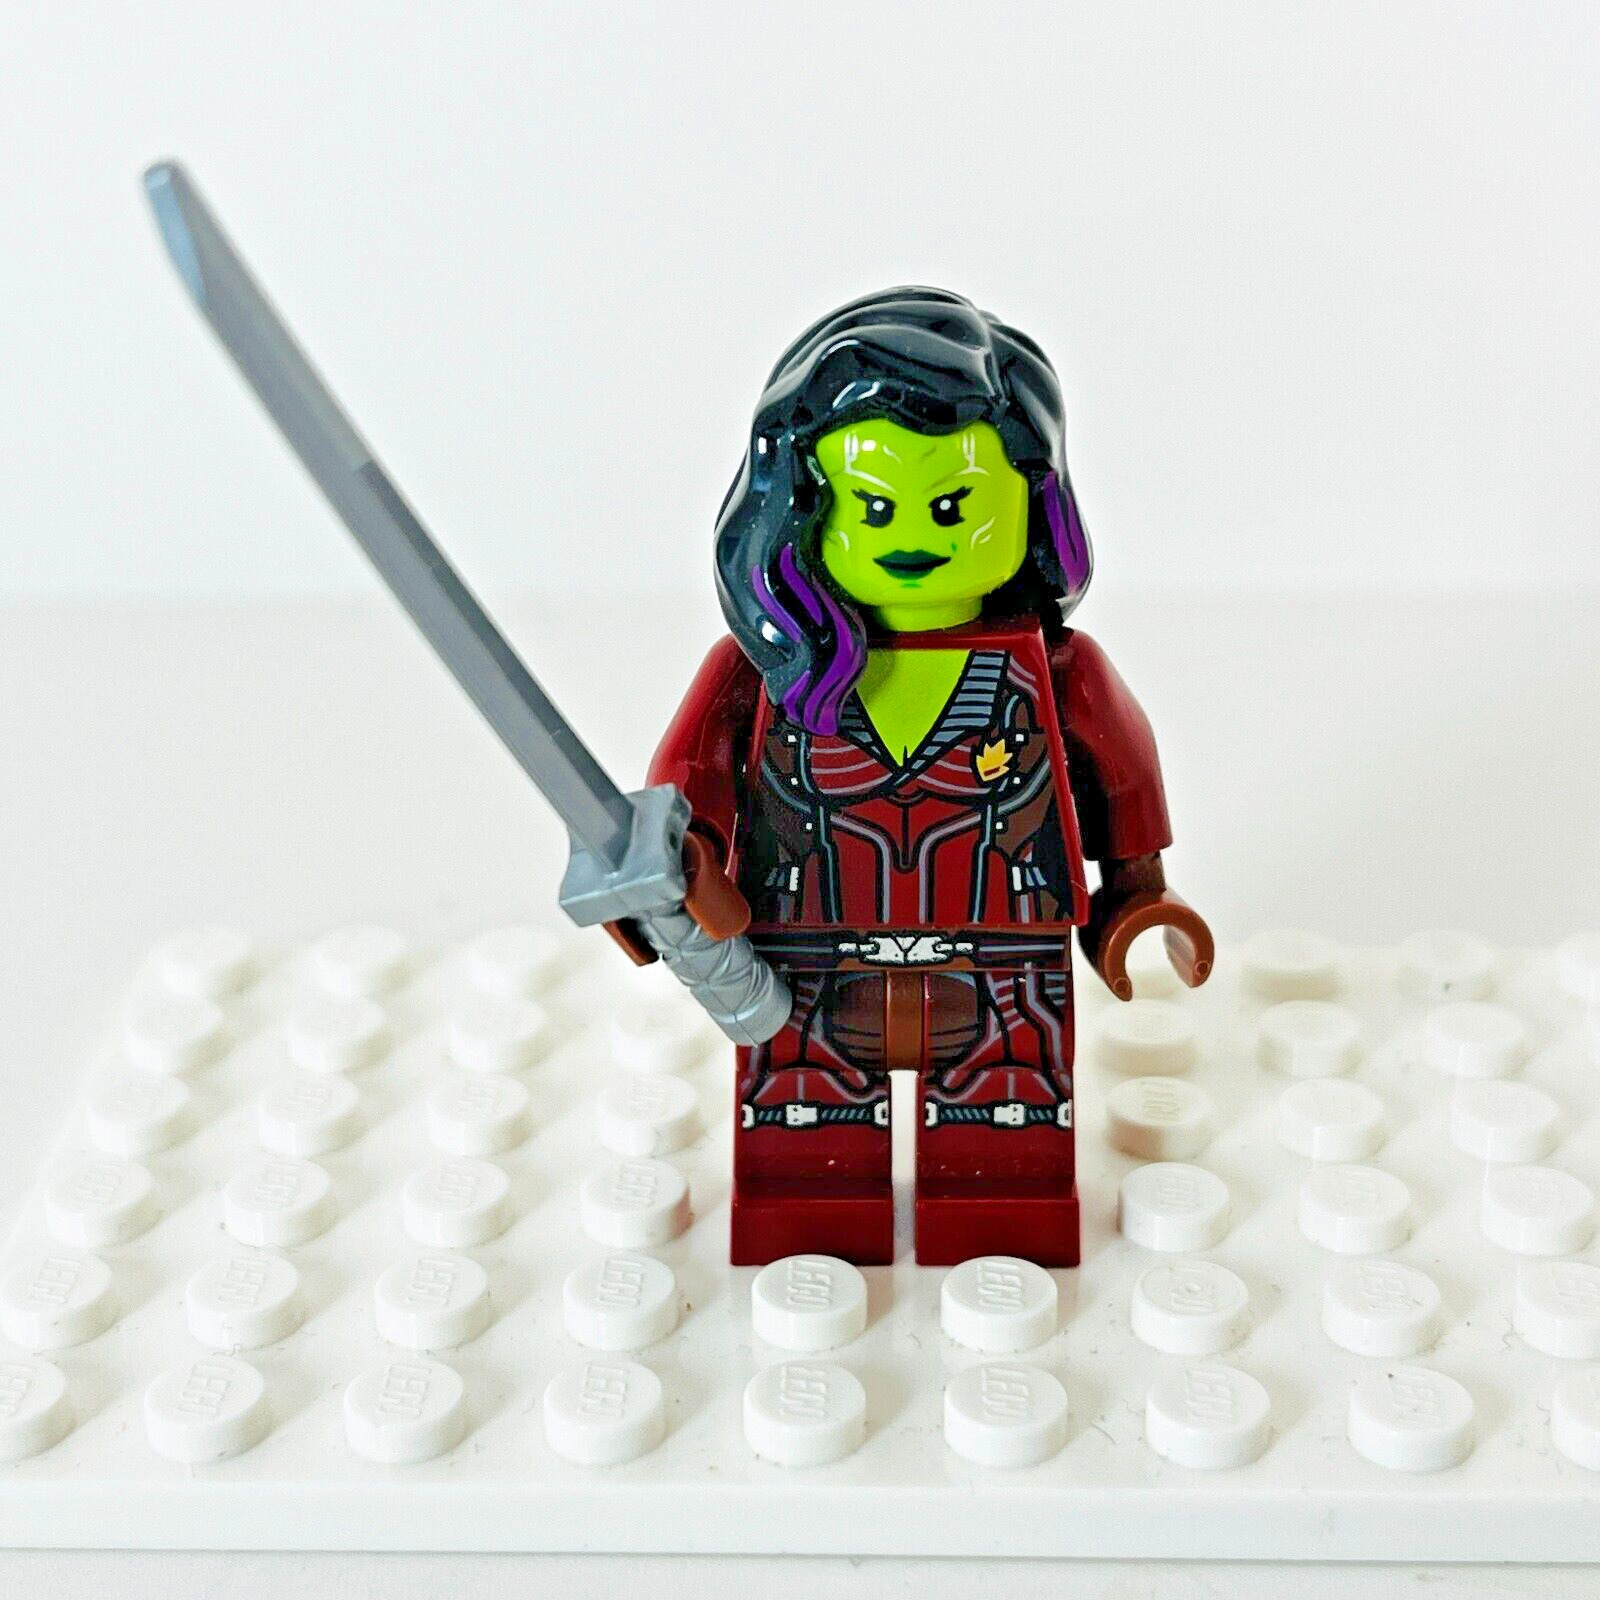 Lego Gamora 76021 Dark Red Suit Super Heroes Guardians of the Galaxy Minifigure